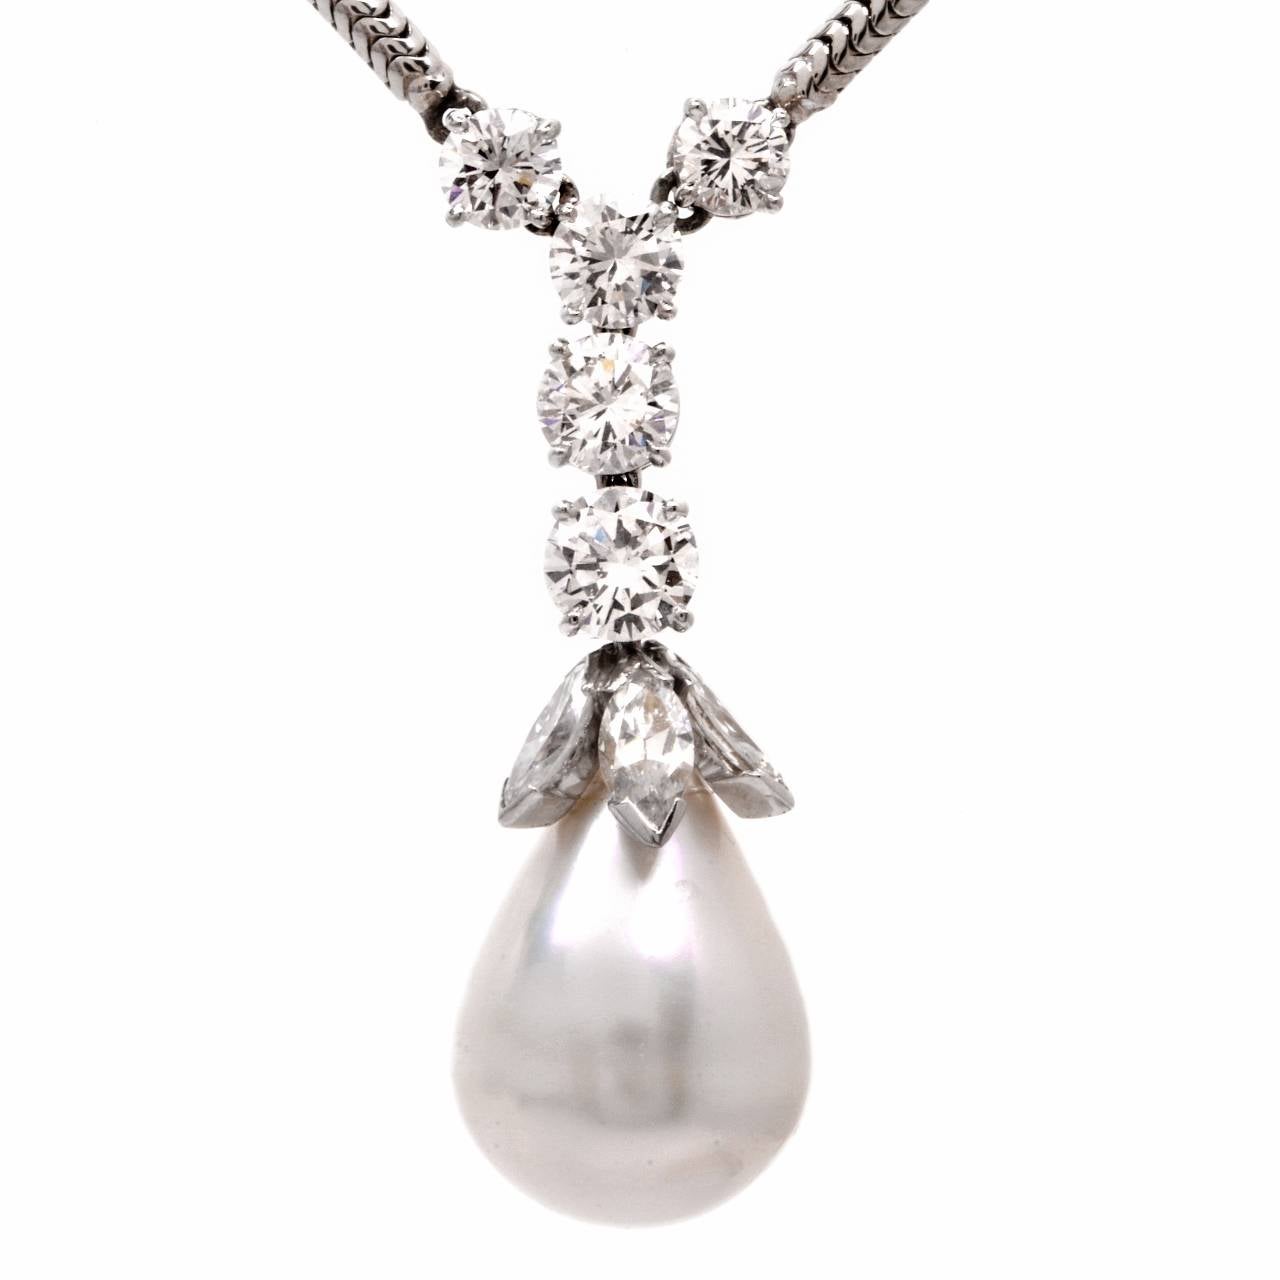 This beautiful pendant necklace with a pear shape Baroque pearl and  marquise and round-faceted diamonds is crafted in 18k gold.  The eye -catching pearl is  surmounted by a vertical diamonds row composed of 5 graduated round faceted large diamonds